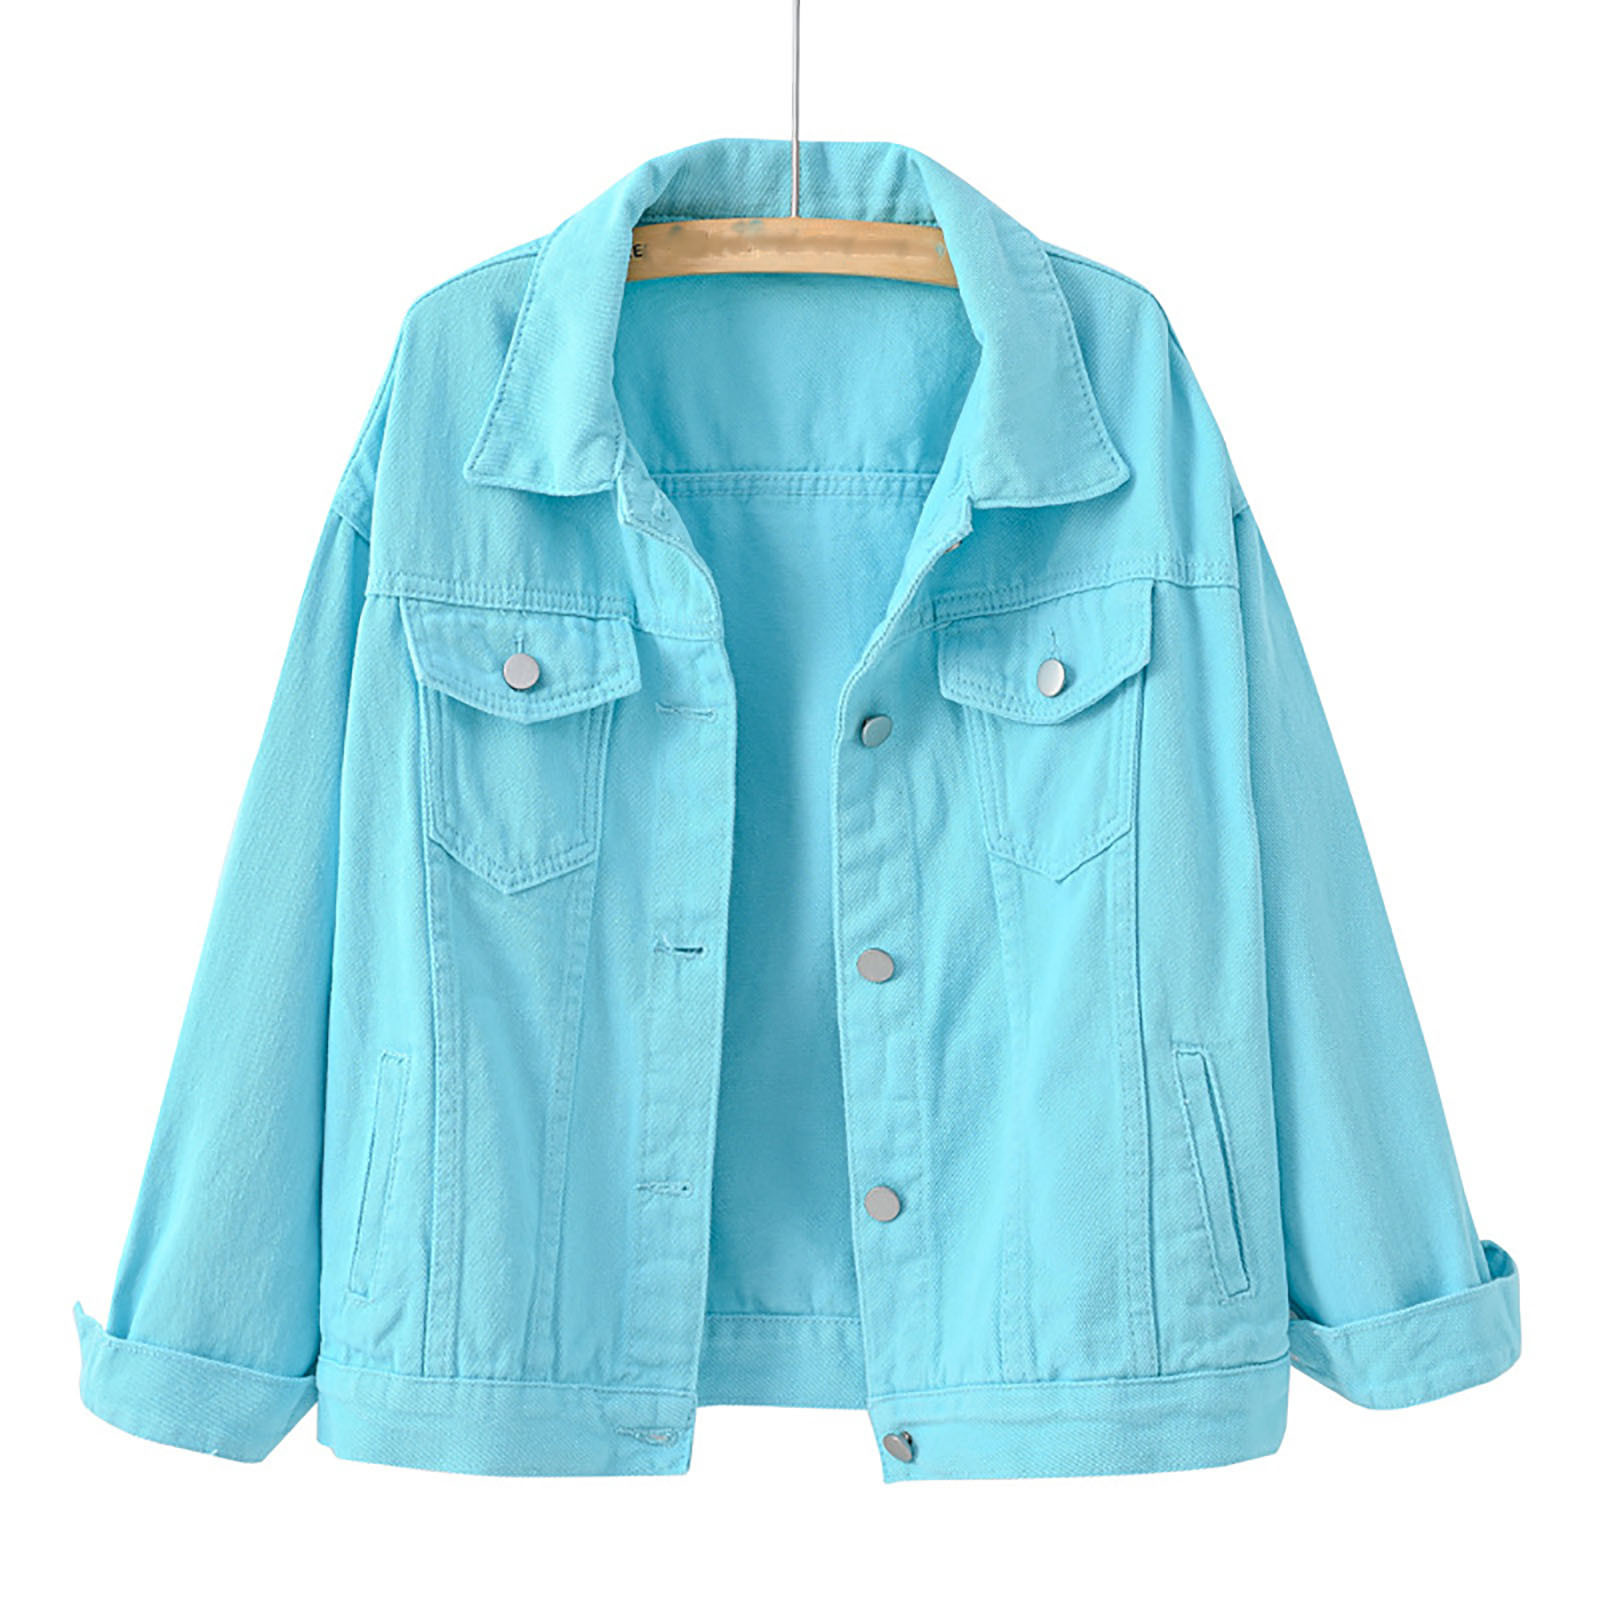 2023 Women's Button Down Jean Denim Jackets Lapel Casual Shackets Solid Classic Denim Coat Outerwear Autumn Spring Womens Clothes - image 4 of 4